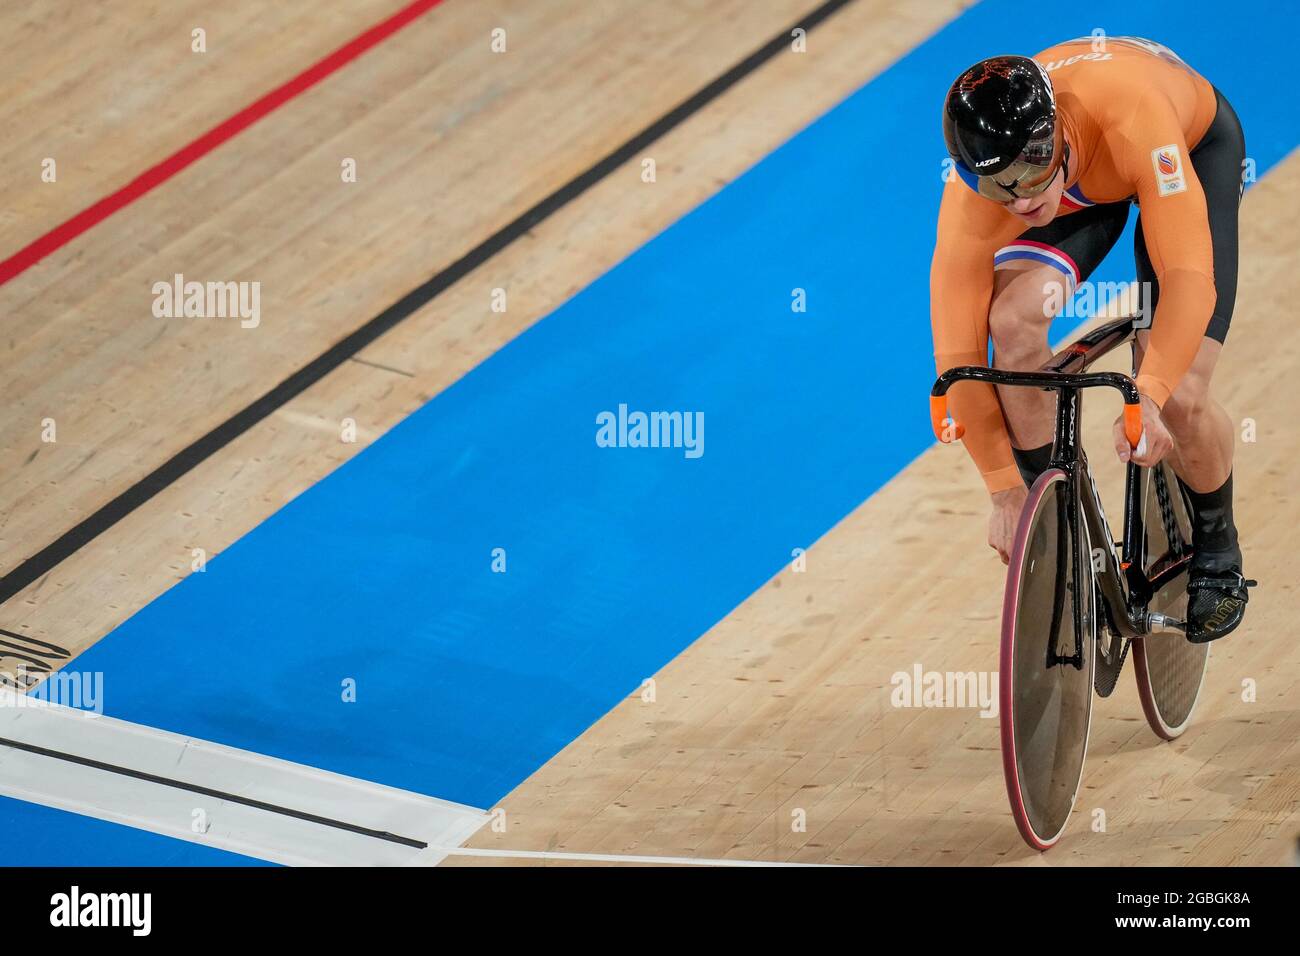 Tokyo, Japan. 04th Aug, 2021. TOKYO, JAPAN - AUGUST 4: competing on Men's Sprint Qualifying during the Tokyo 2020 Olympic Games at the Izu Velodrome on August 4, 2021 in Tokyo, Japan (Photo by Yannick Verhoeven/Orange Pictures) NOCNSF Credit: Orange Pics BV/Alamy Live News Stock Photo